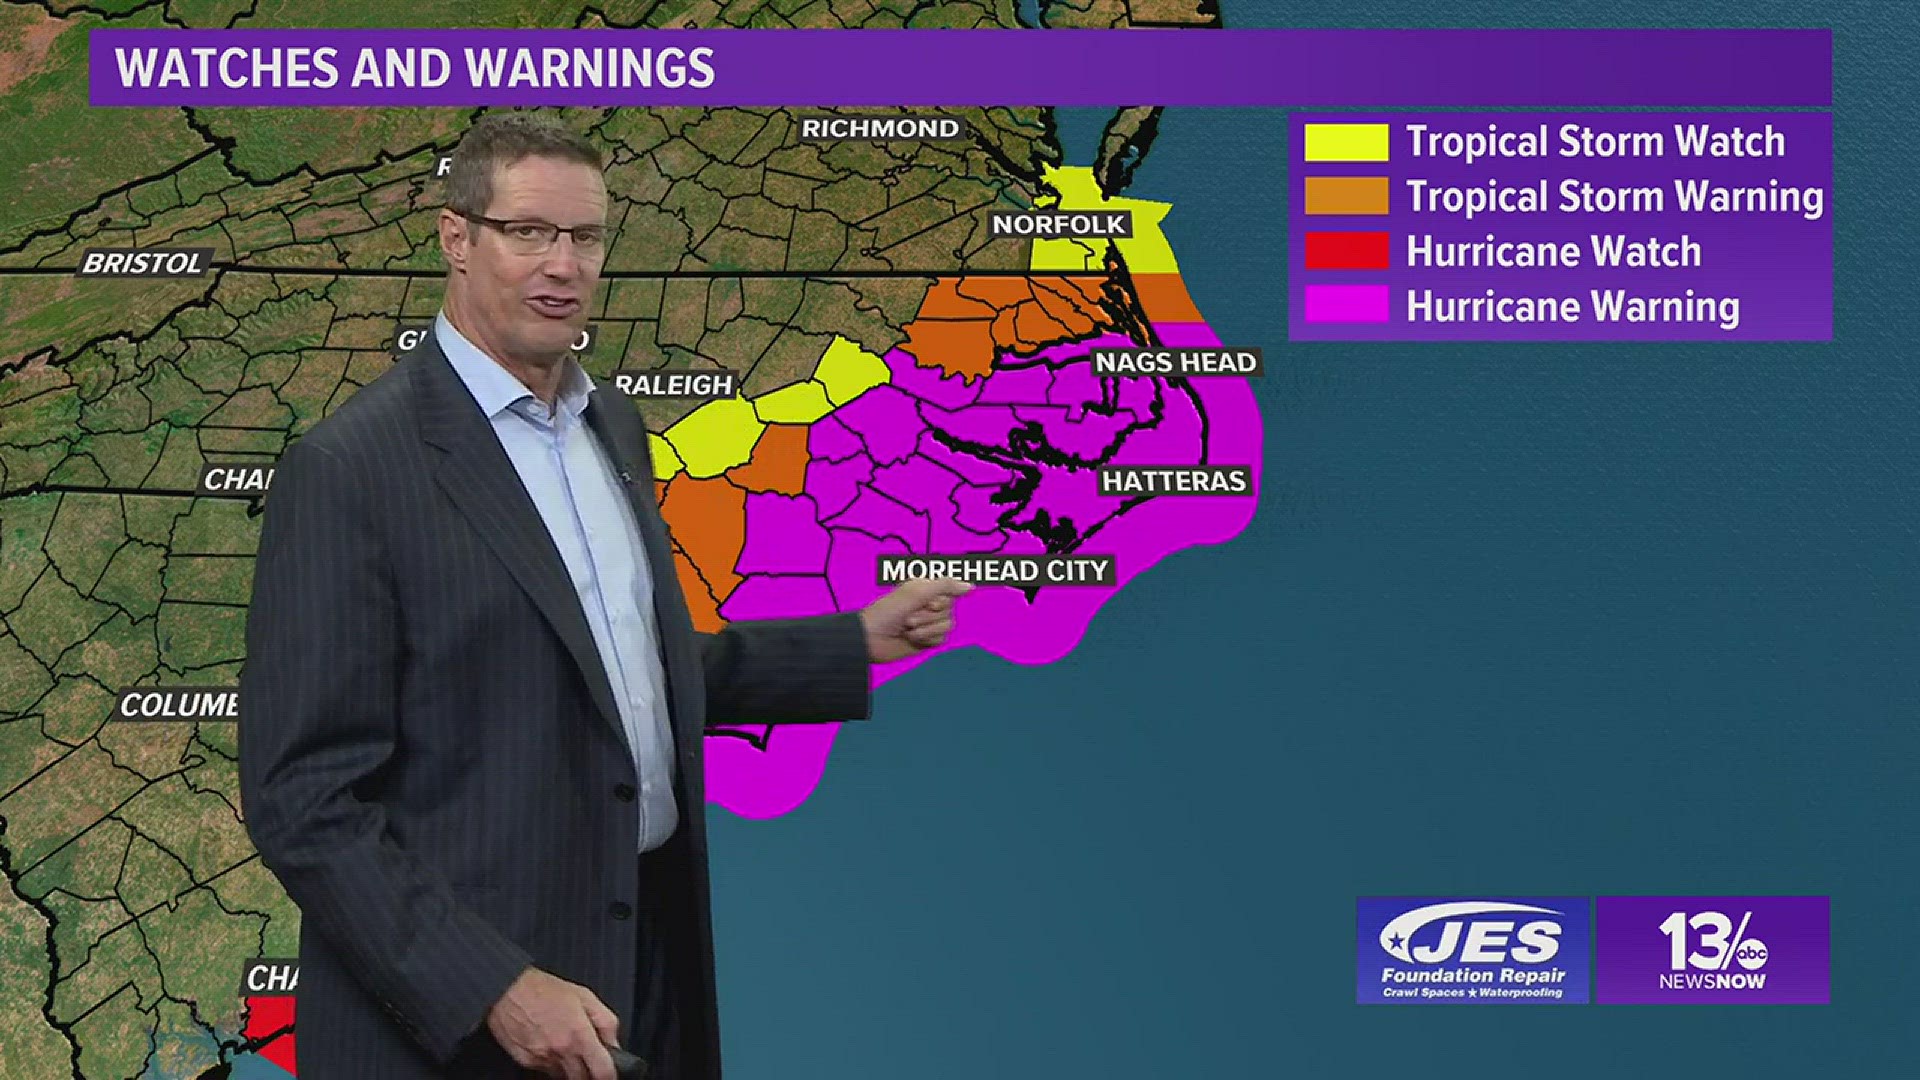 13News Now Chief Meteorologist Jeff Lawson takes a look at the latest projected forecast tracks for Hurricane Florence as it approaches the Carolina coastline.
Latest on Florence: http://13newsnow.tv/florence
13News Now's Hurricane Center: 
https://www